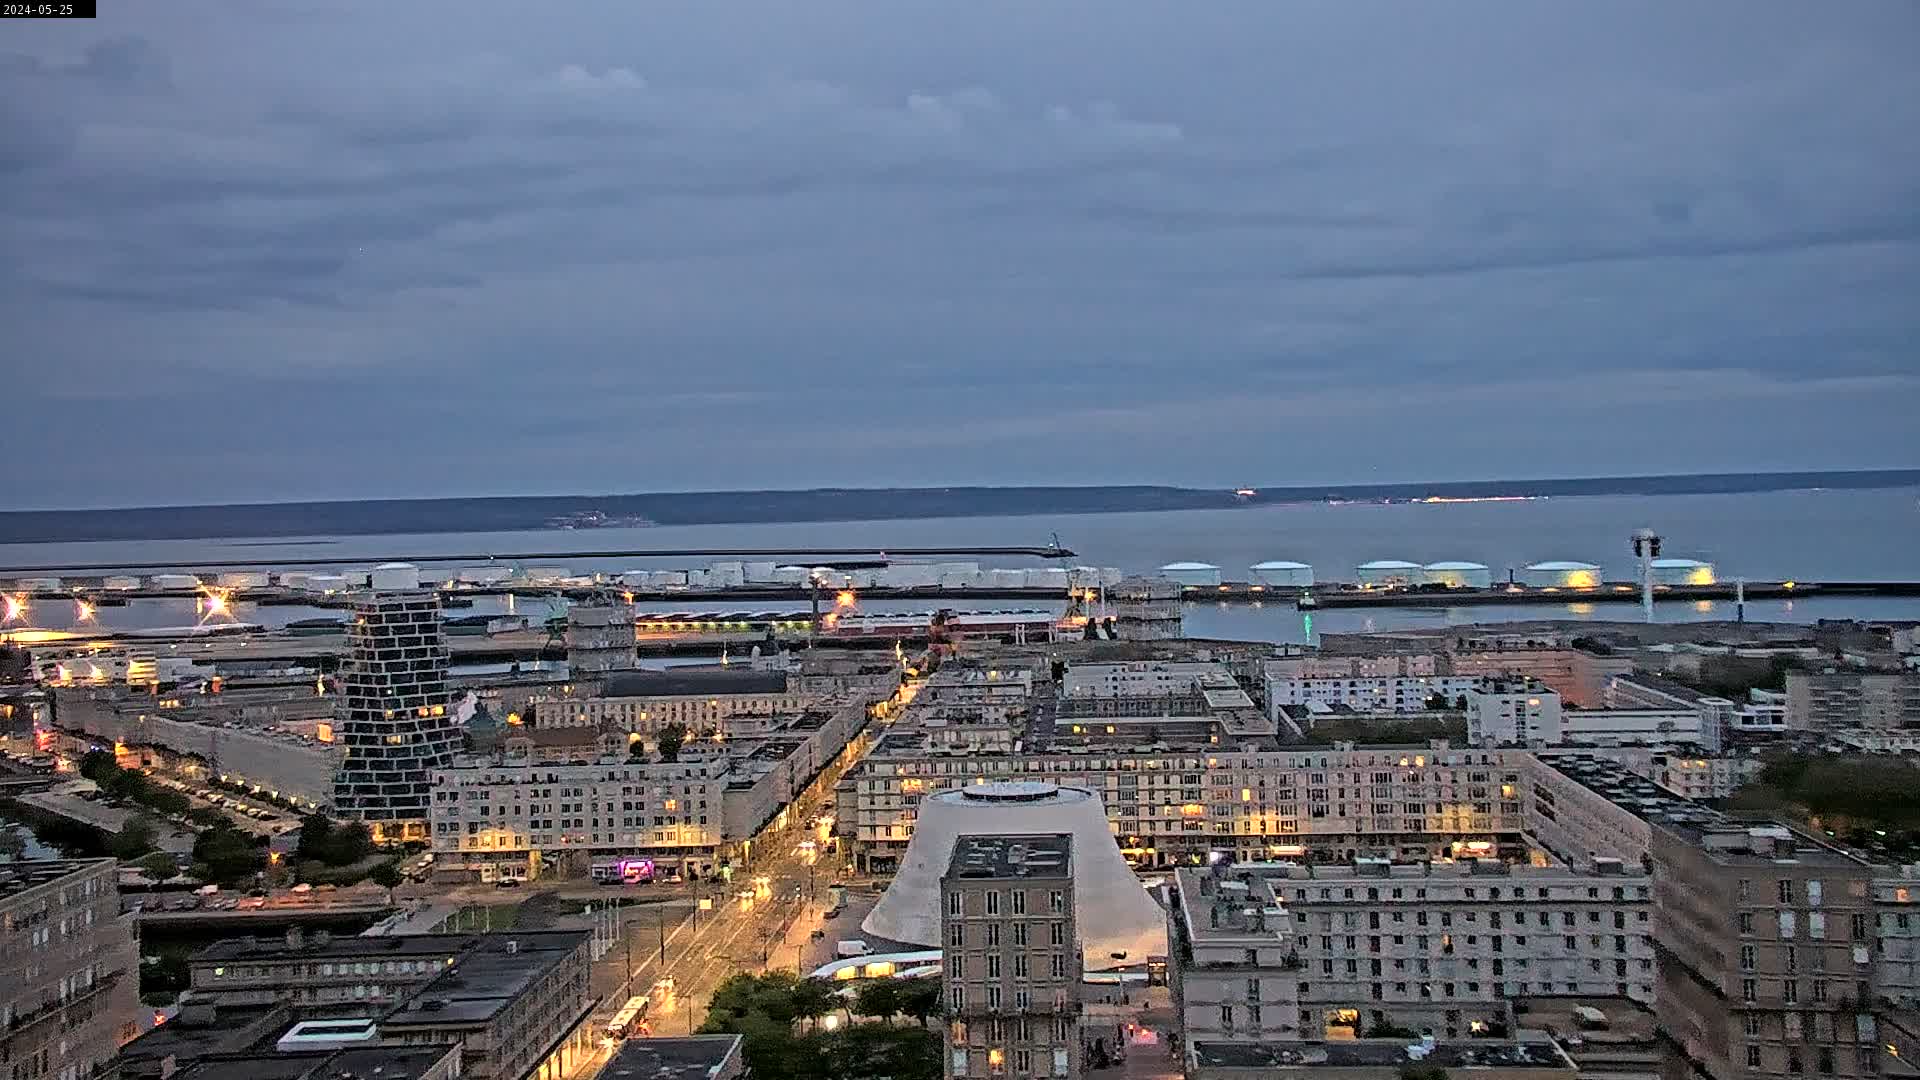 Le Havre Do. 22:10